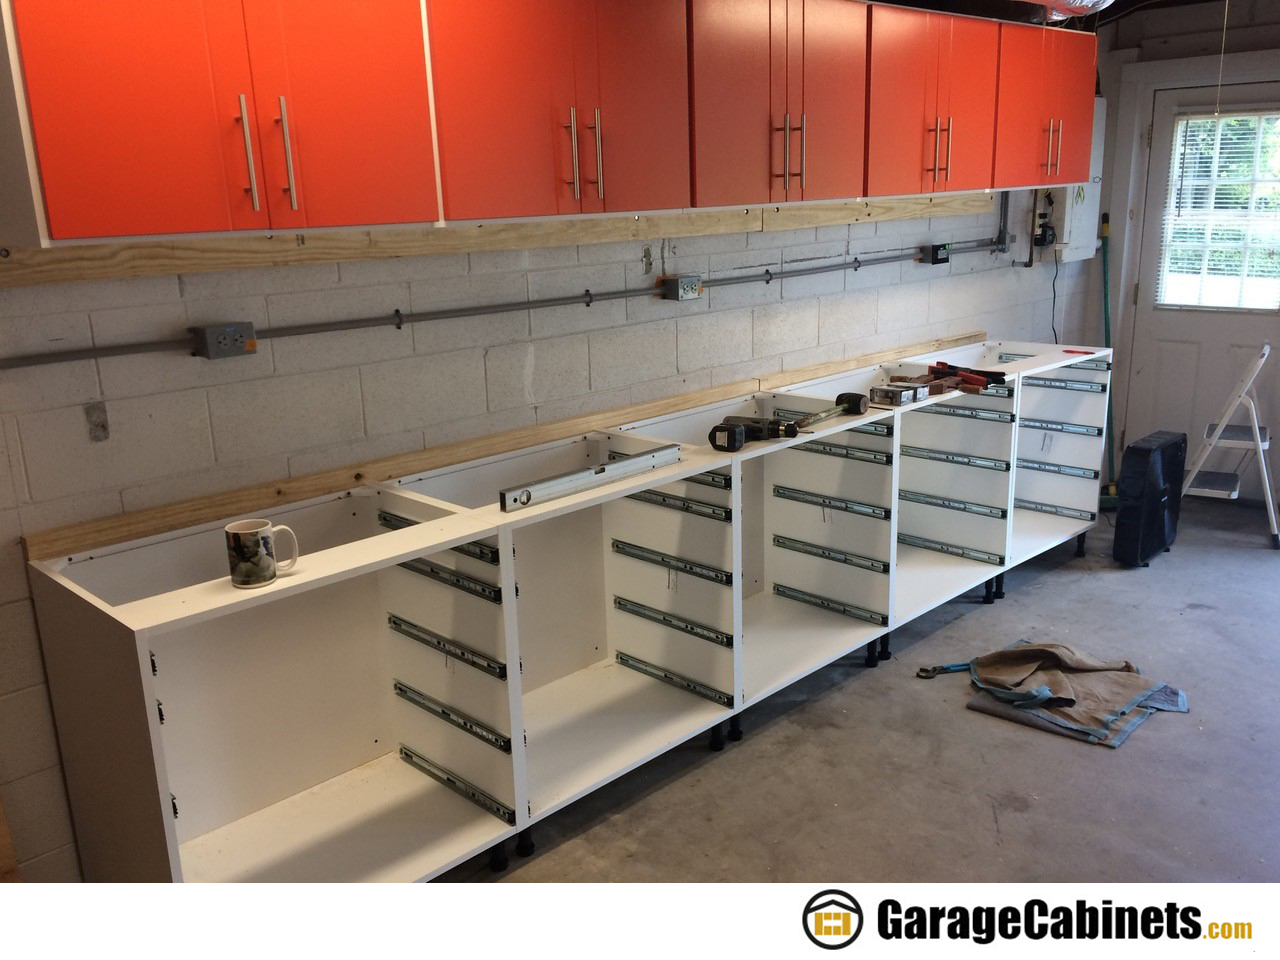 Get The Best Garage Storage Cabinets Without Spending Tons Of Money ...